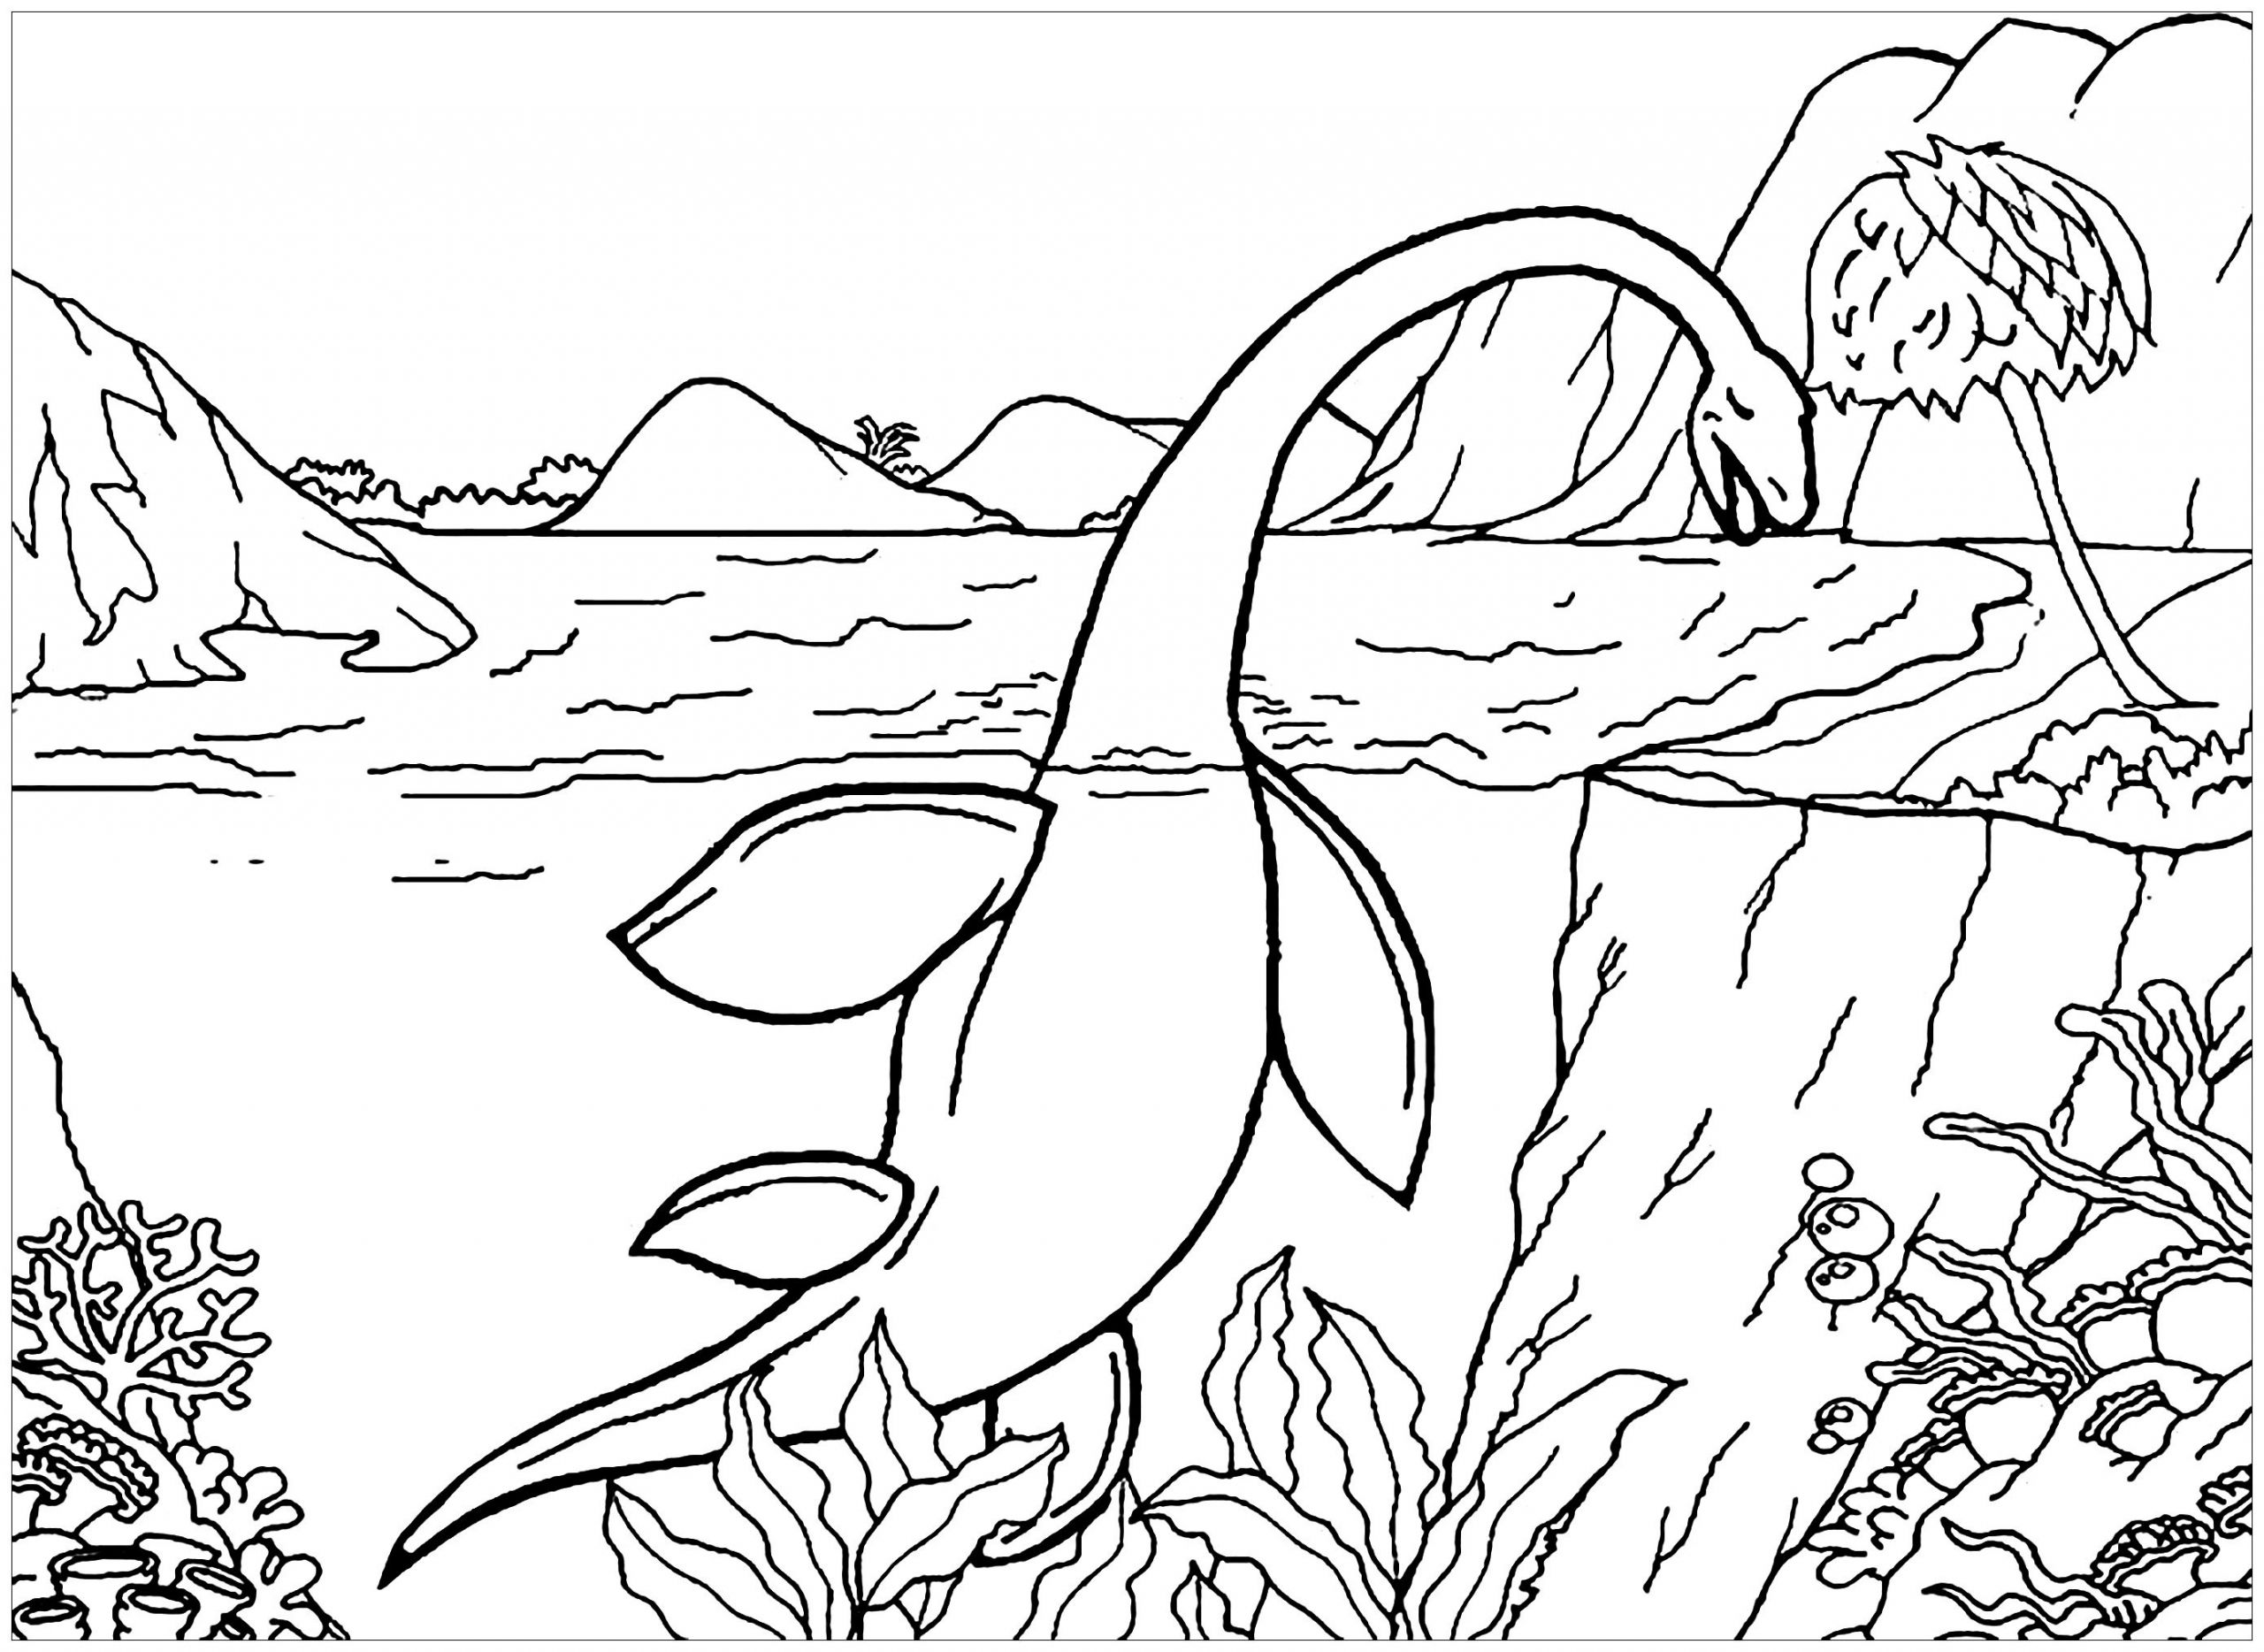 Coloring Pages For Kids Dinosaur
 Dinosaurs to Aquatic dinosaur Dinosaurs Kids